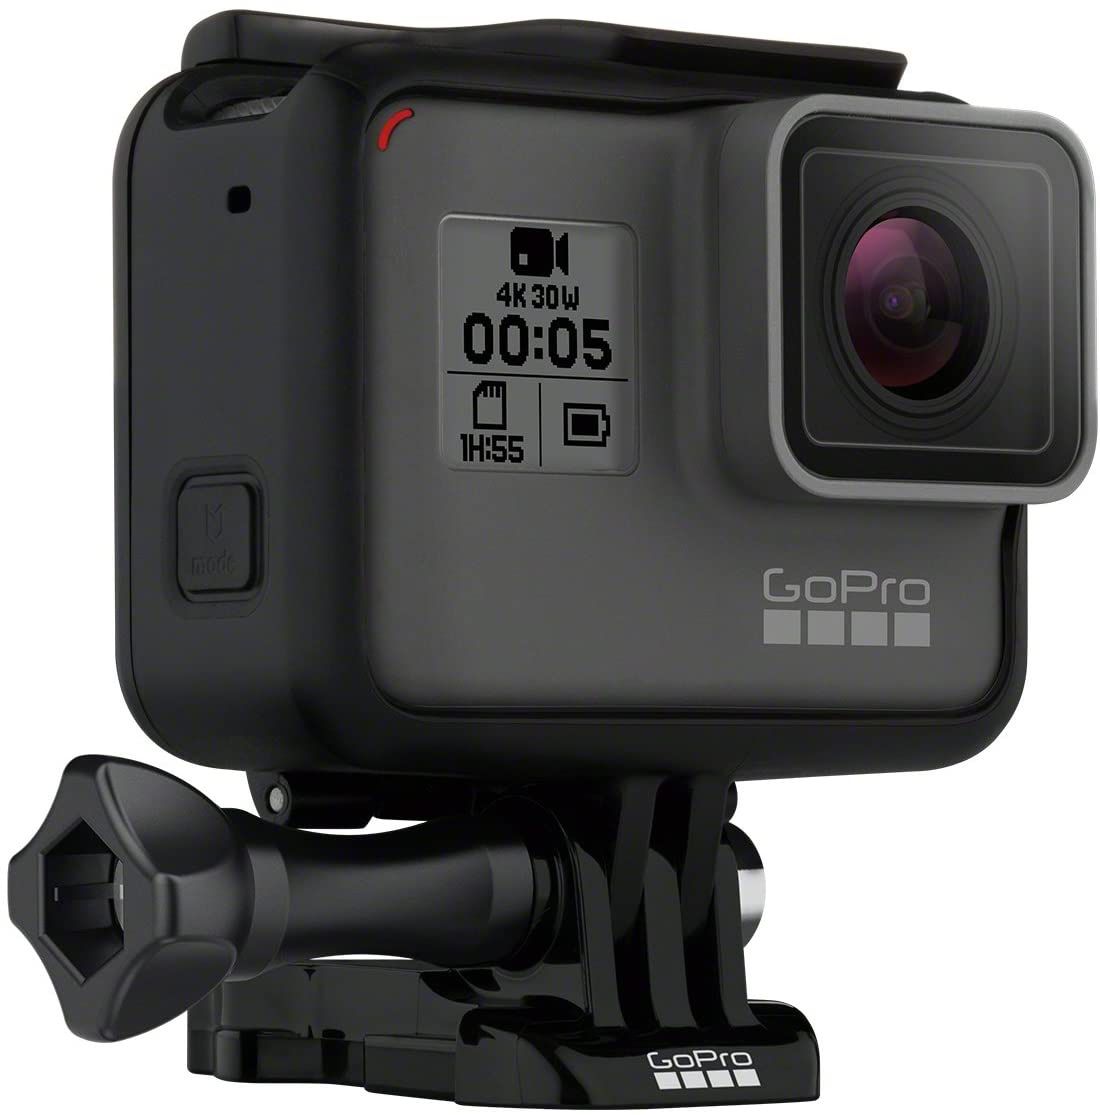 GoPro Hero 5 Will Take Best Offers On Price